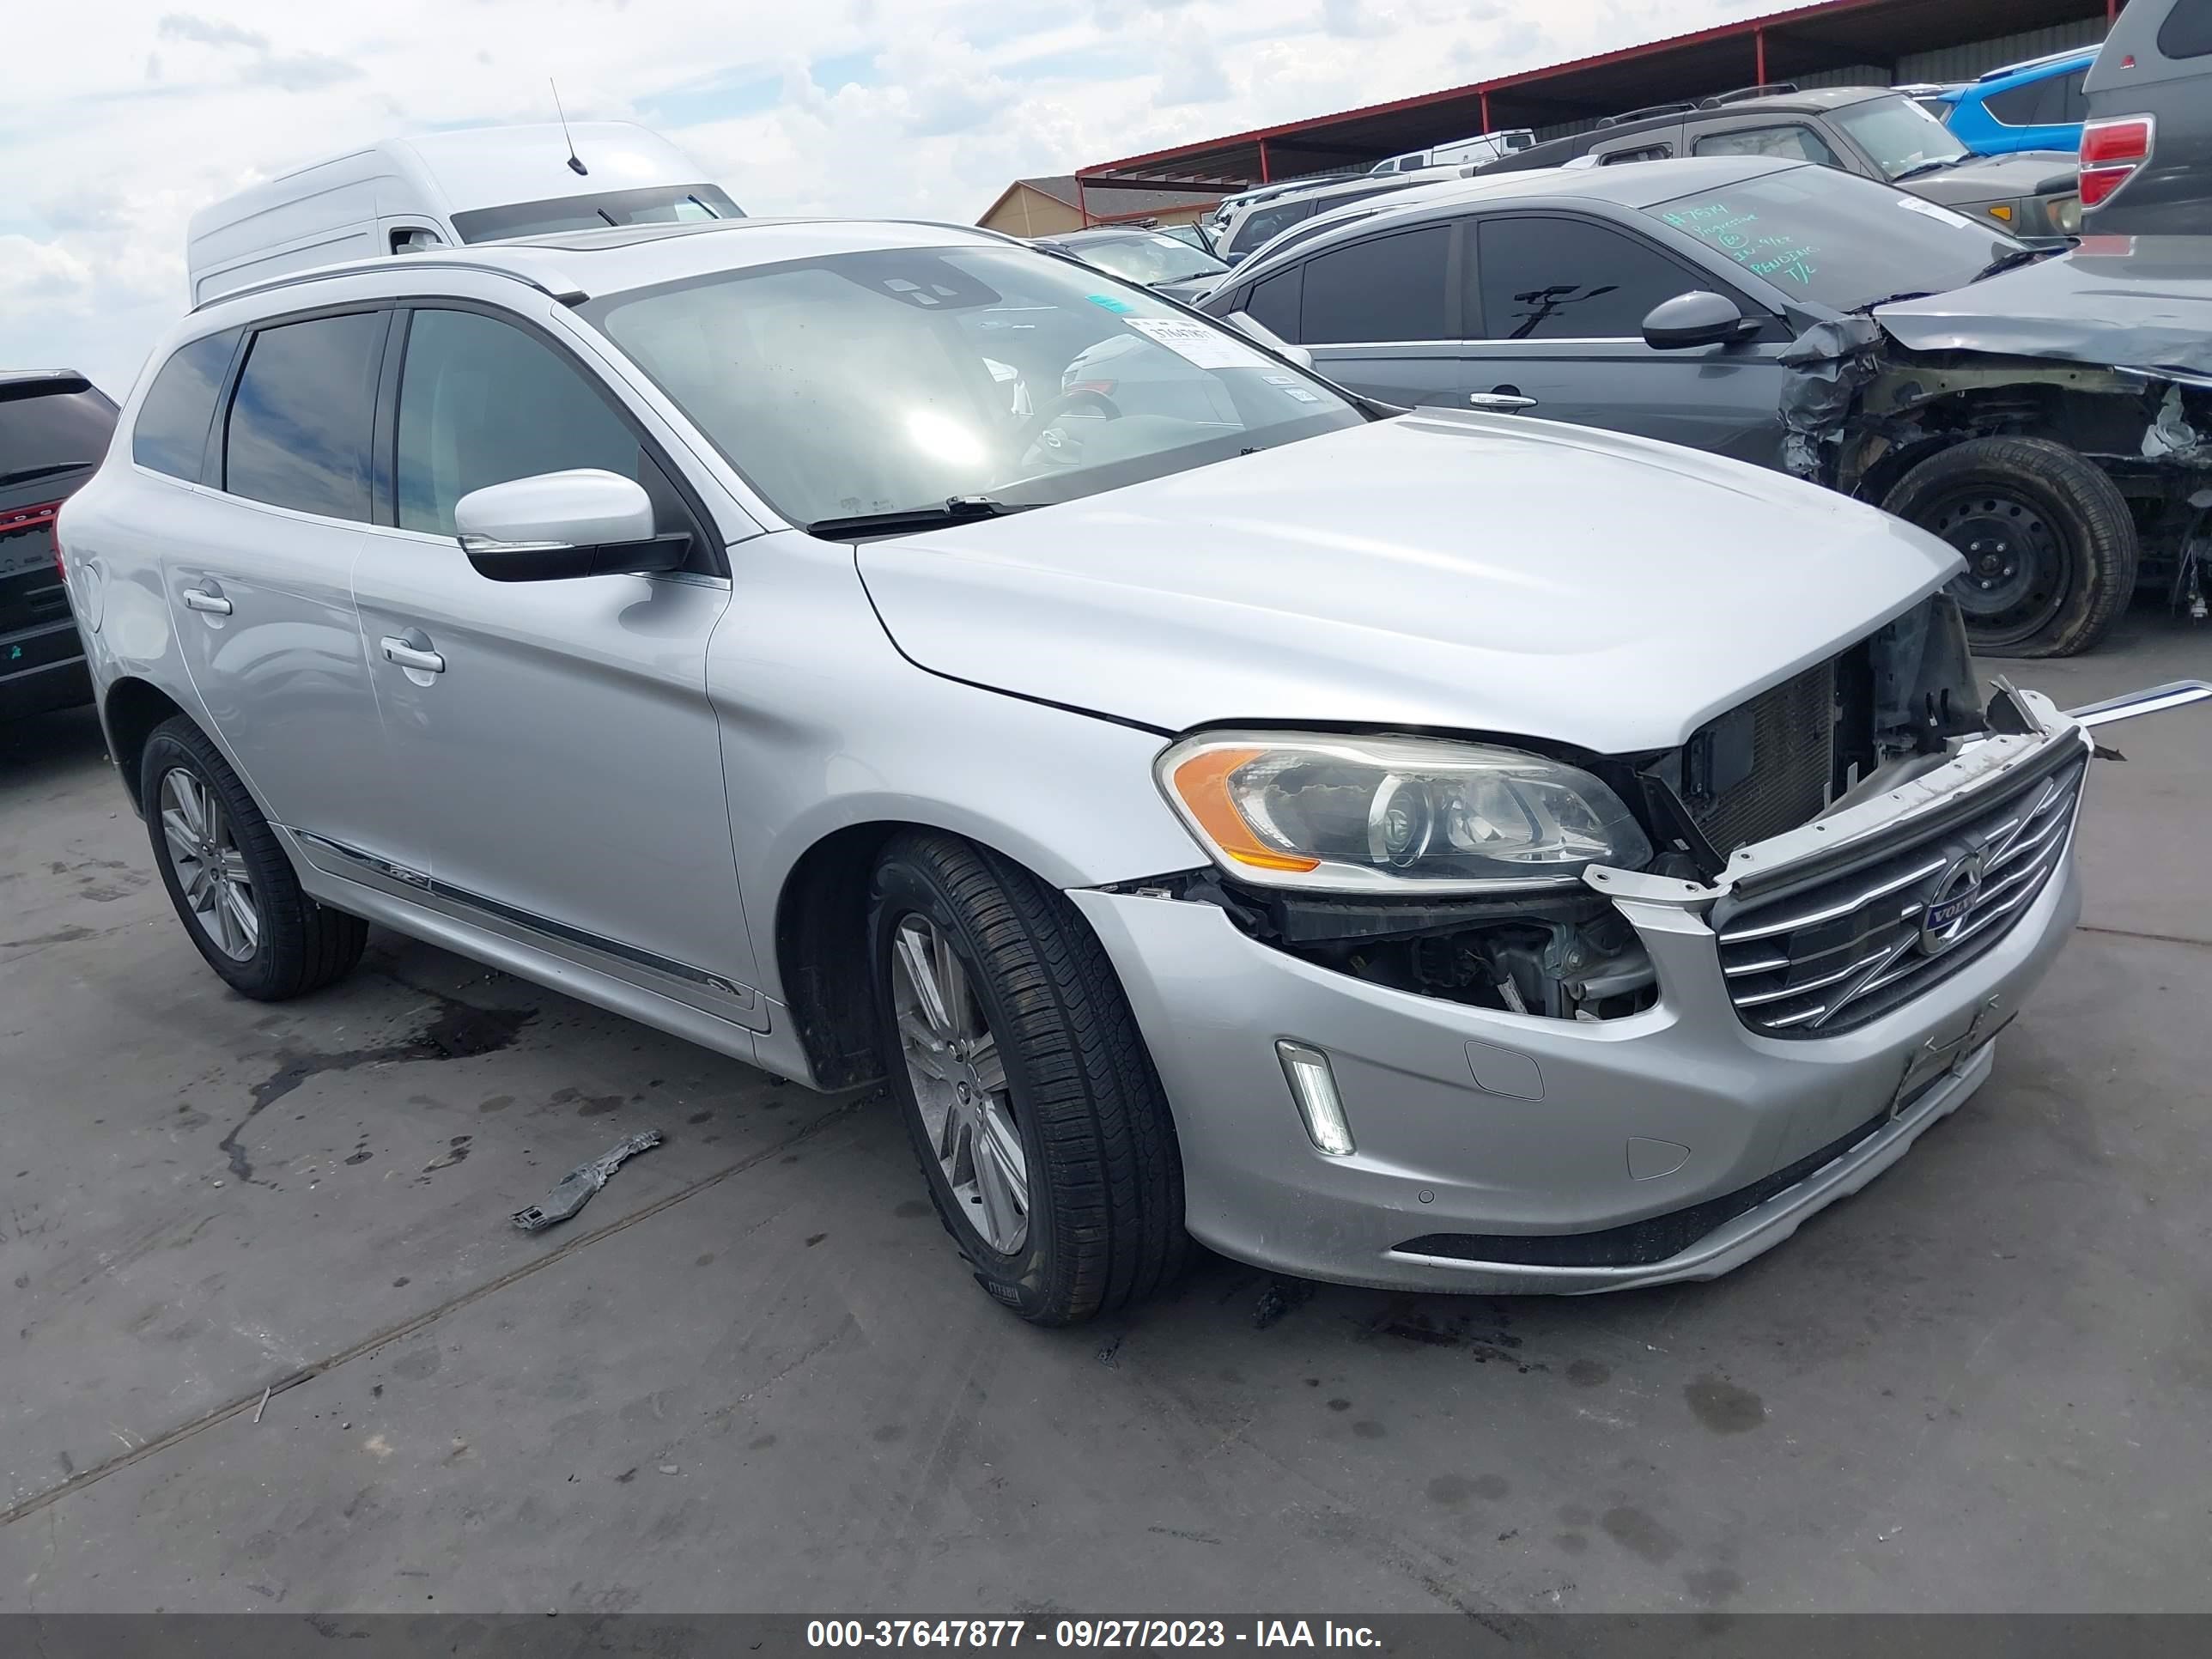 vin: YV449MDM2G2808065 YV449MDM2G2808065 2016 volvo xc60 2000 for Sale in 78616, 2191 Highway 21 West, Dale, Texas, USA